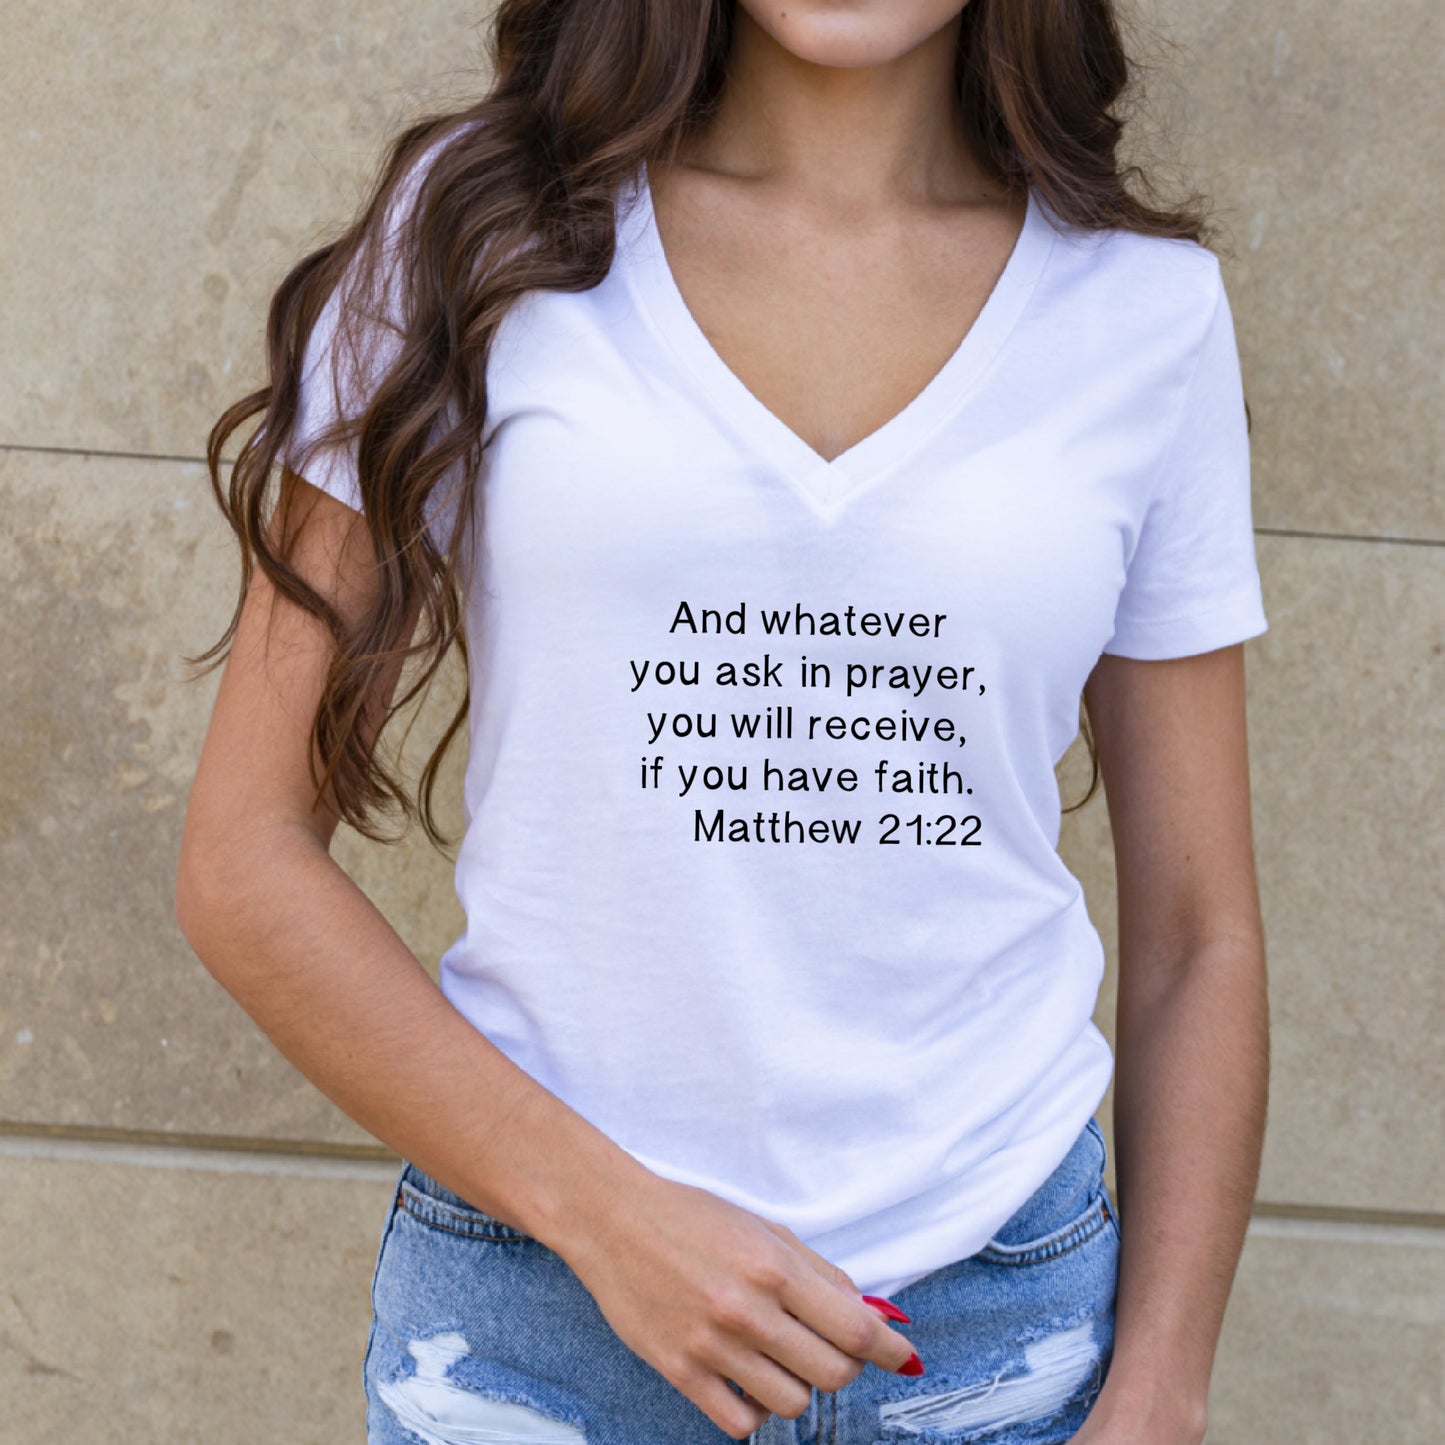 And whatever you ask for in prayer you will receive if you have faith Mathew 21:22 white unisex T-shirt